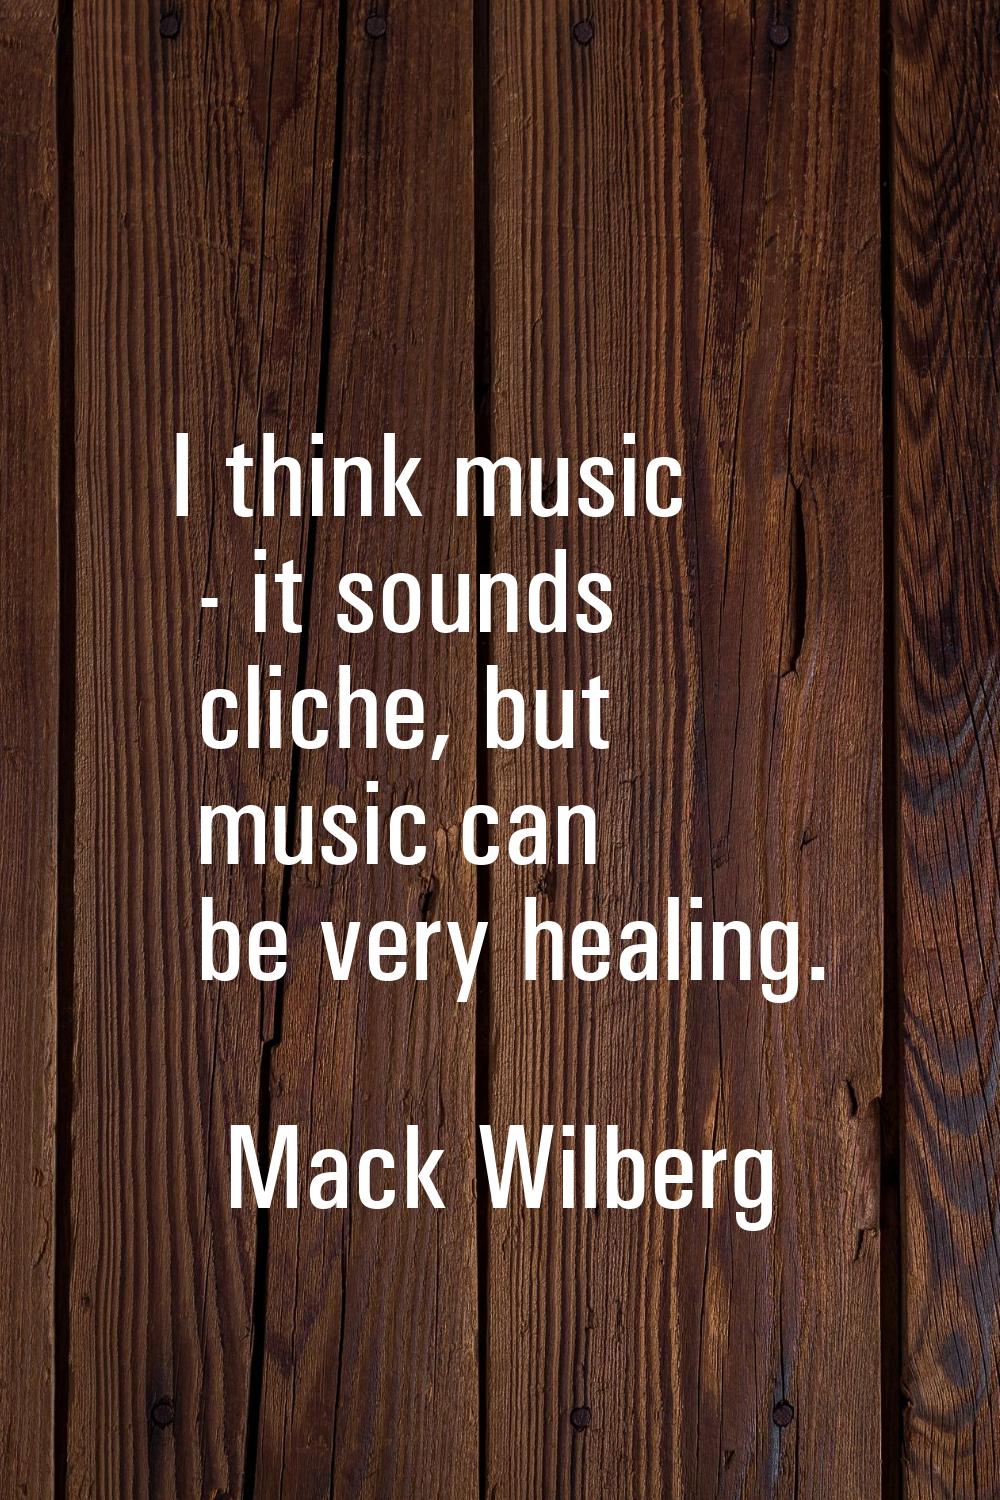 I think music - it sounds cliche, but music can be very healing.